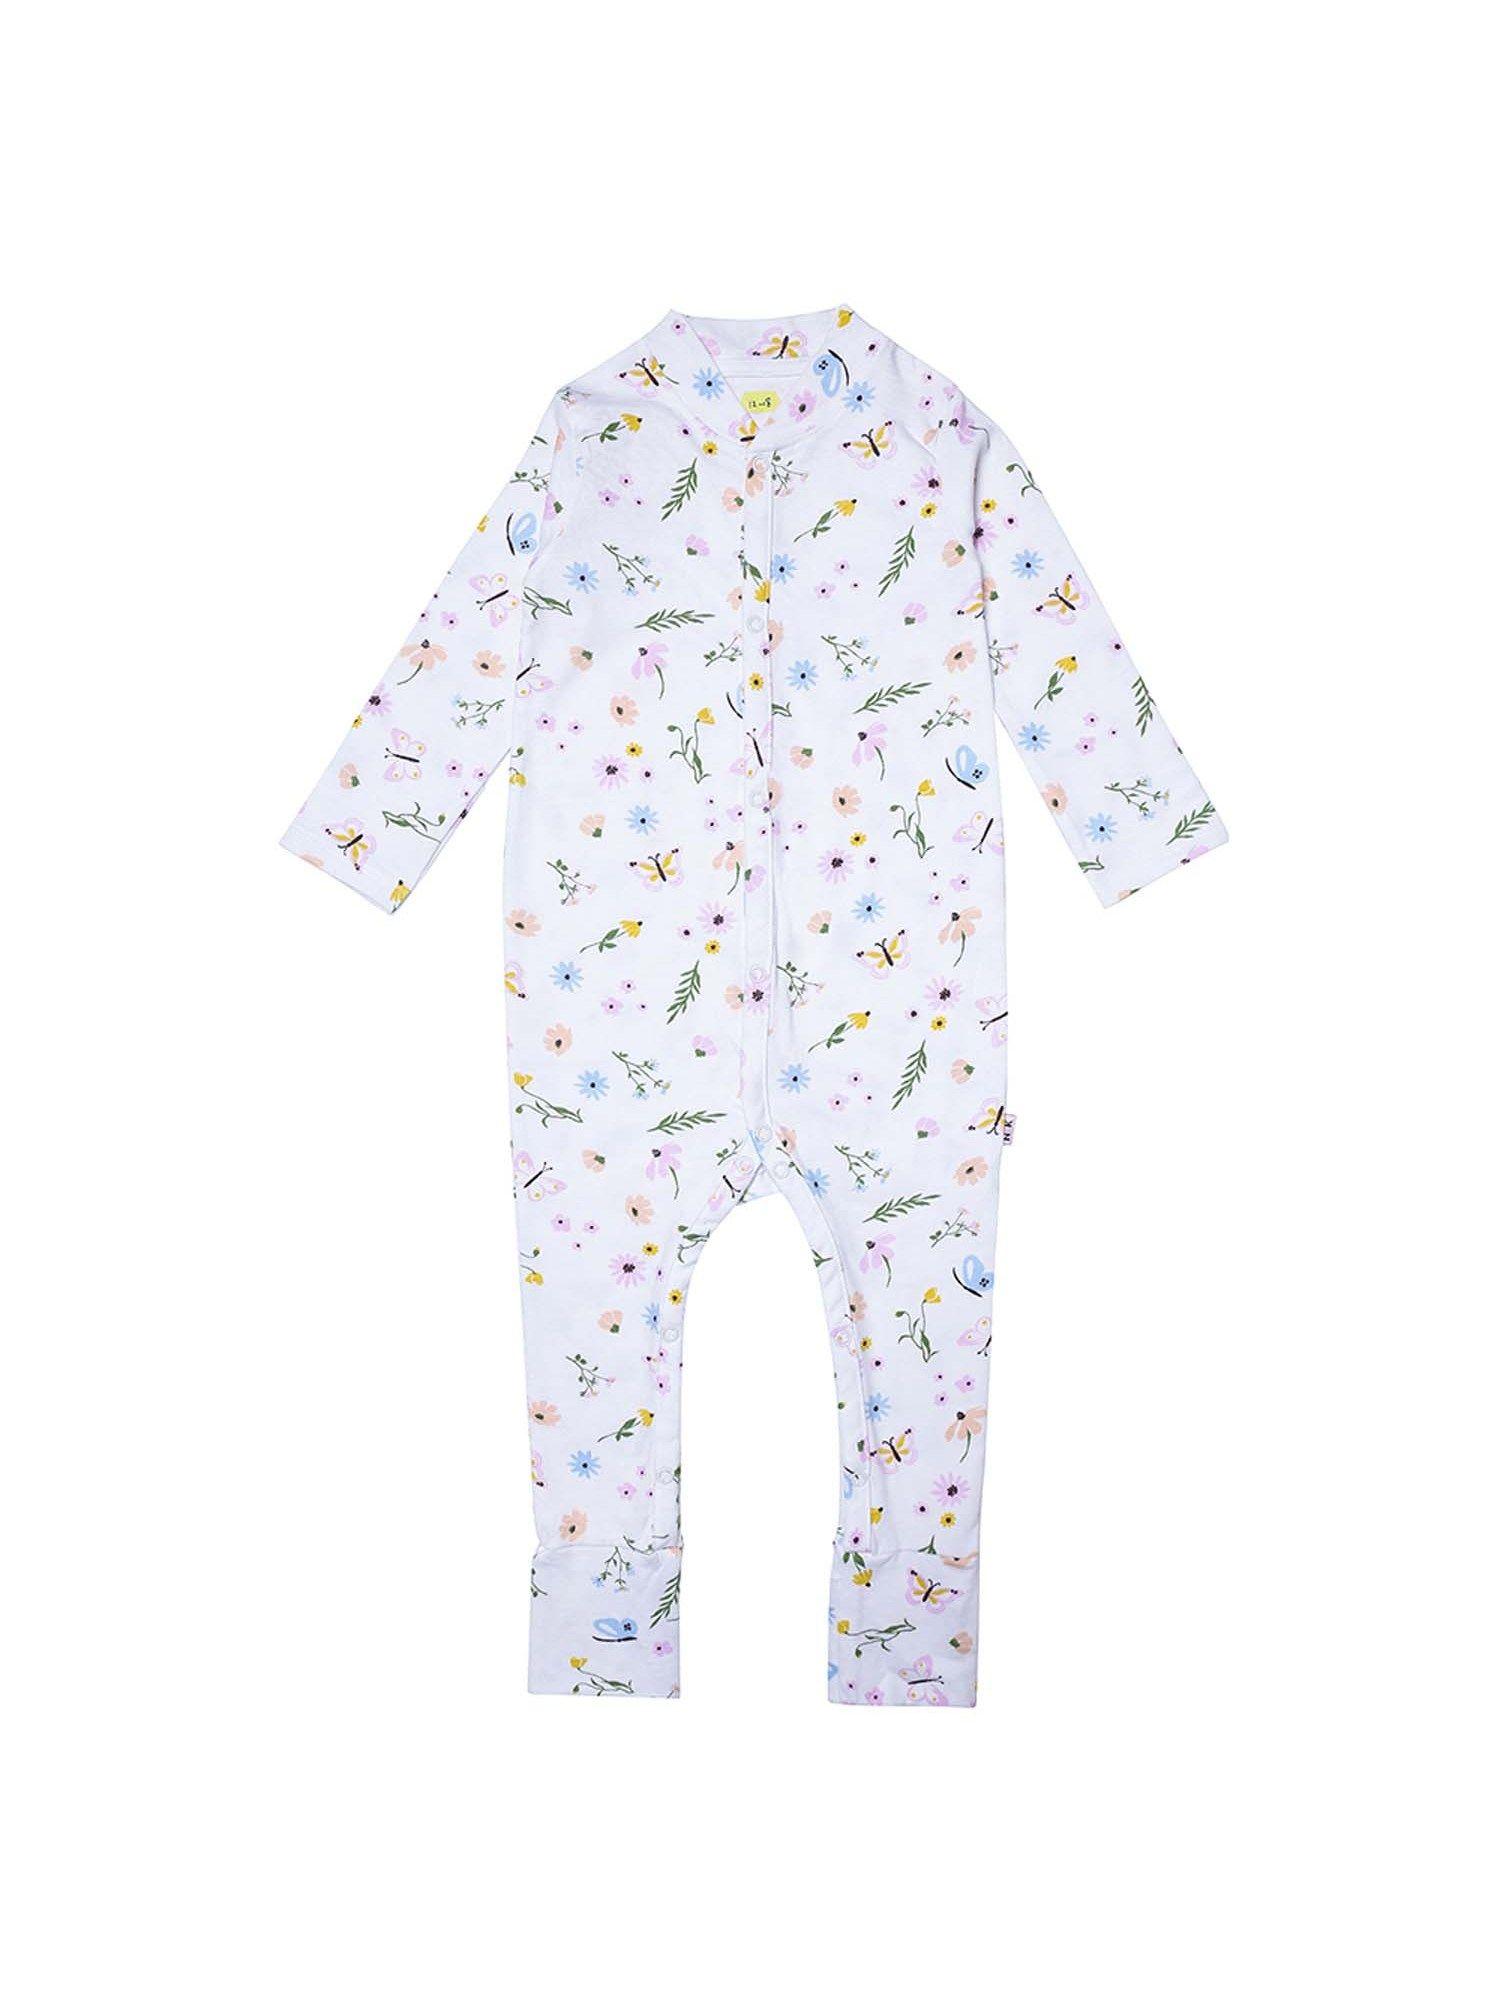 butterfly-fly-away-unisex-sleepsuit-multi-color